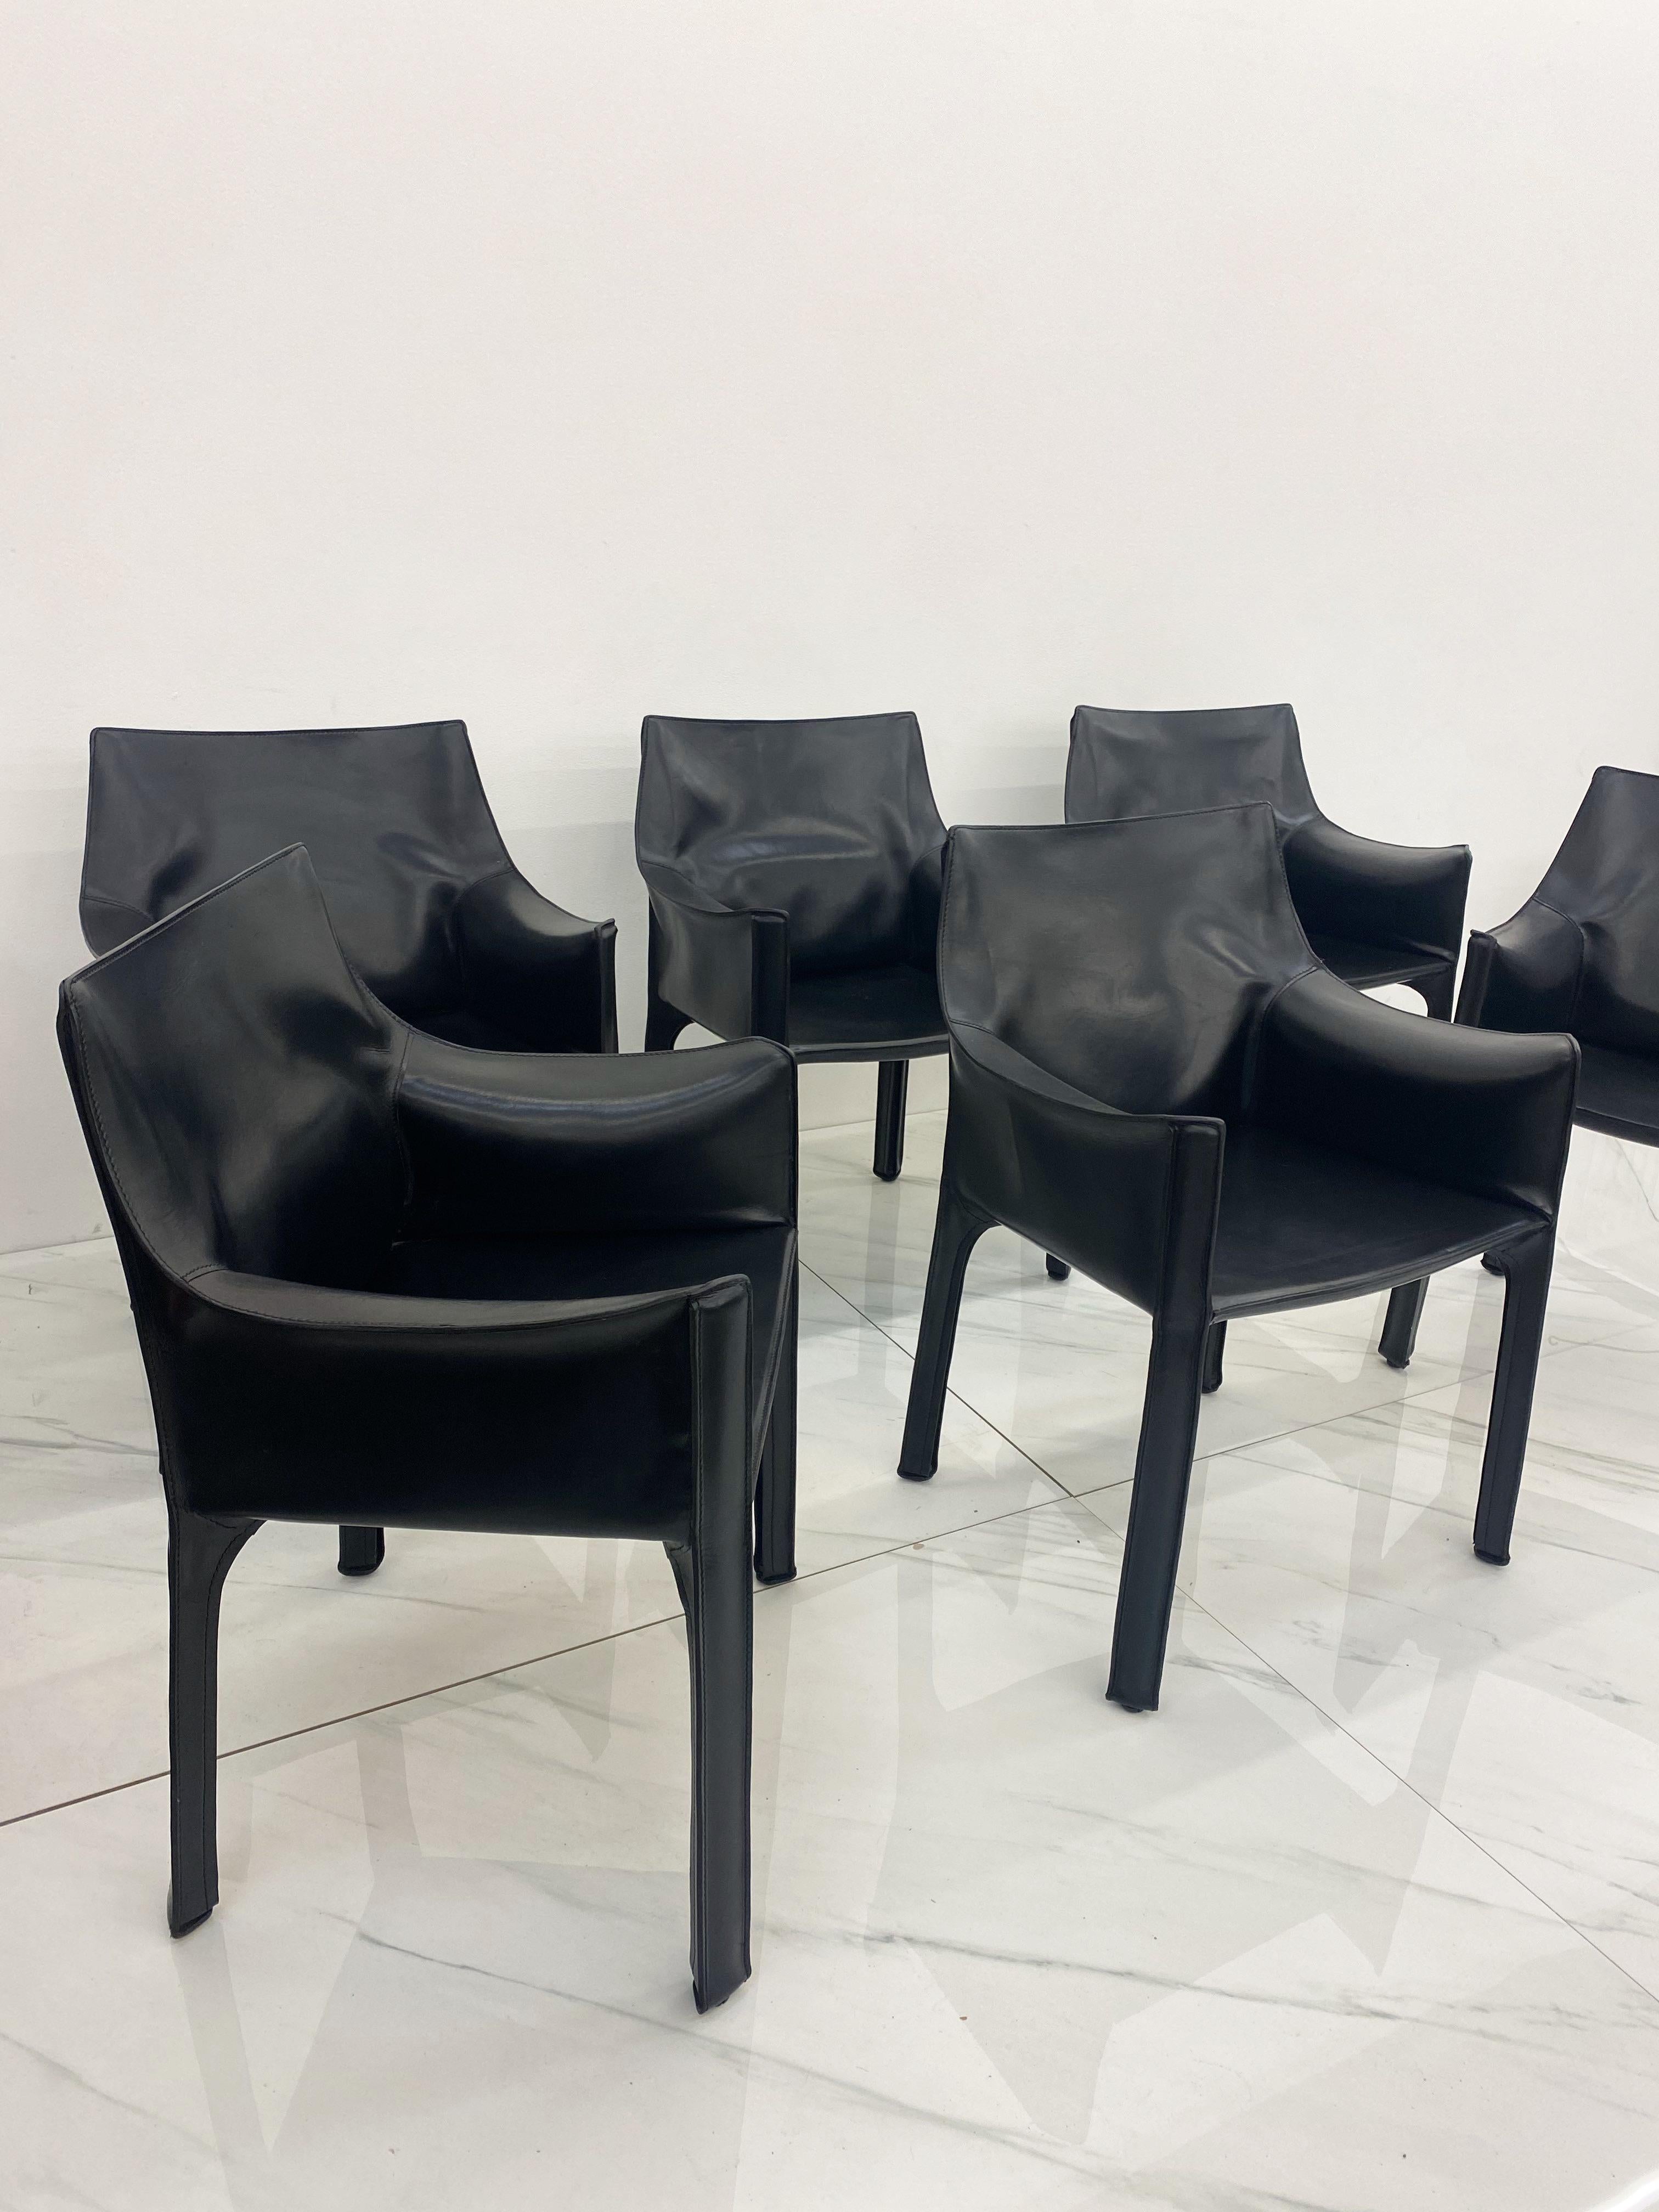 Italian Early Production 'Cab' Armchairs by Mario Bellini for Cassina, c 1978, Signed